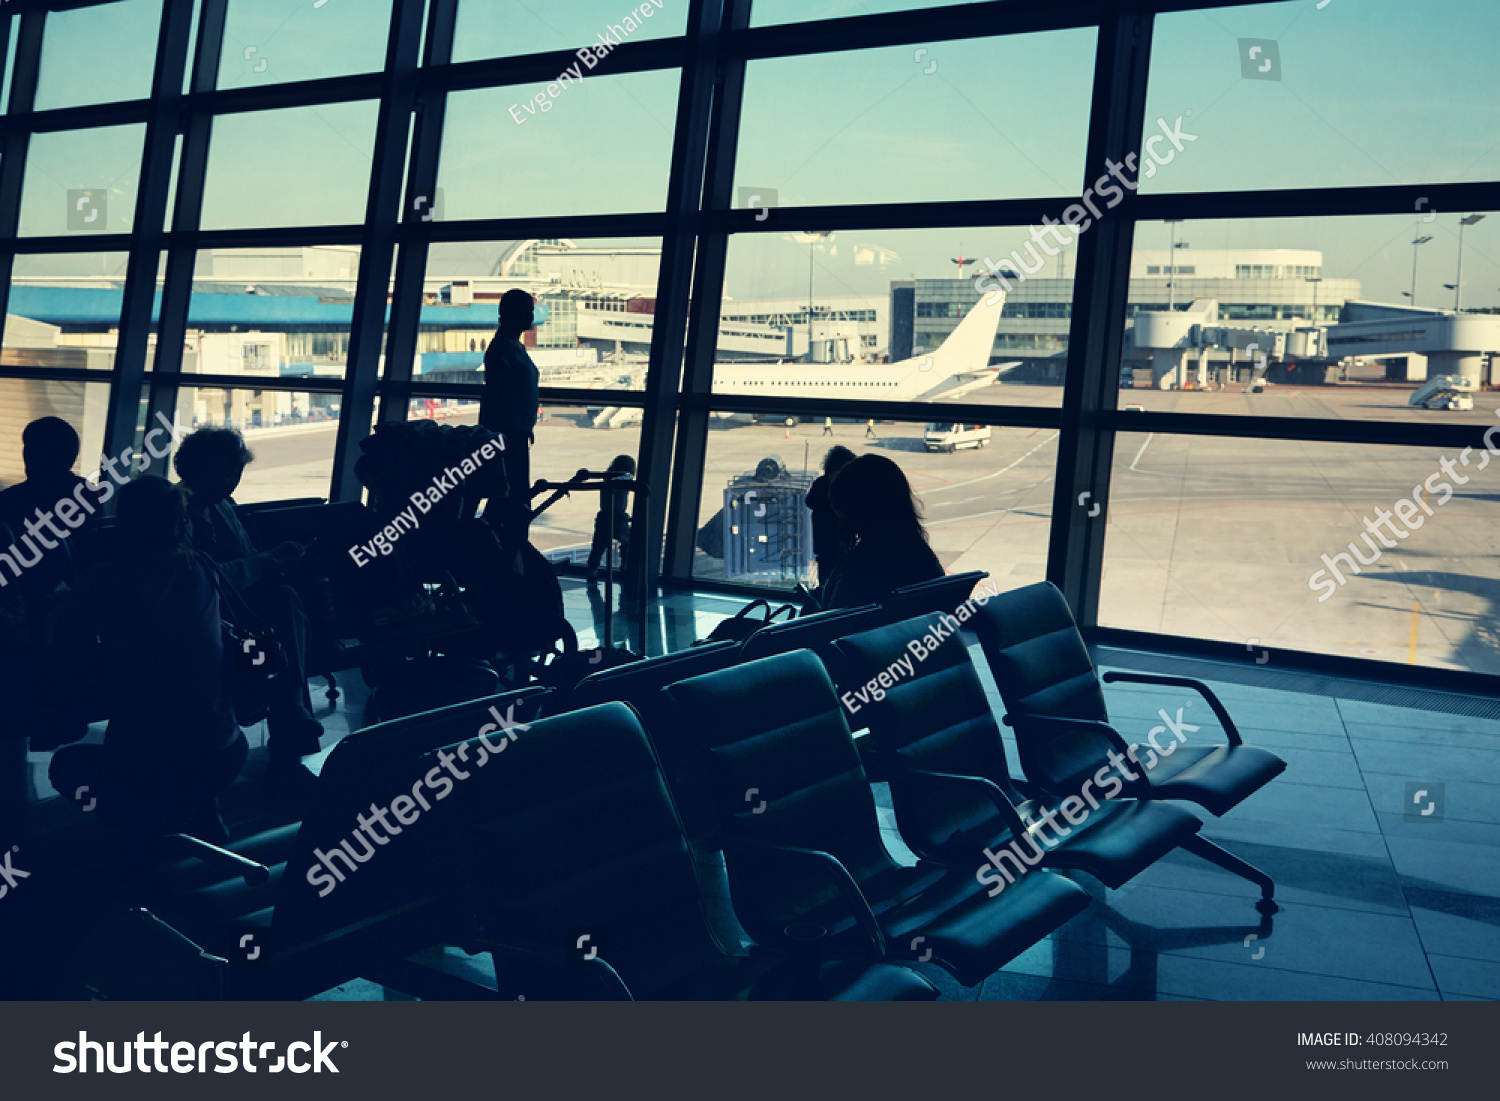 silhouette of a group of people in an airport waiting hall. travel business concept #408094342